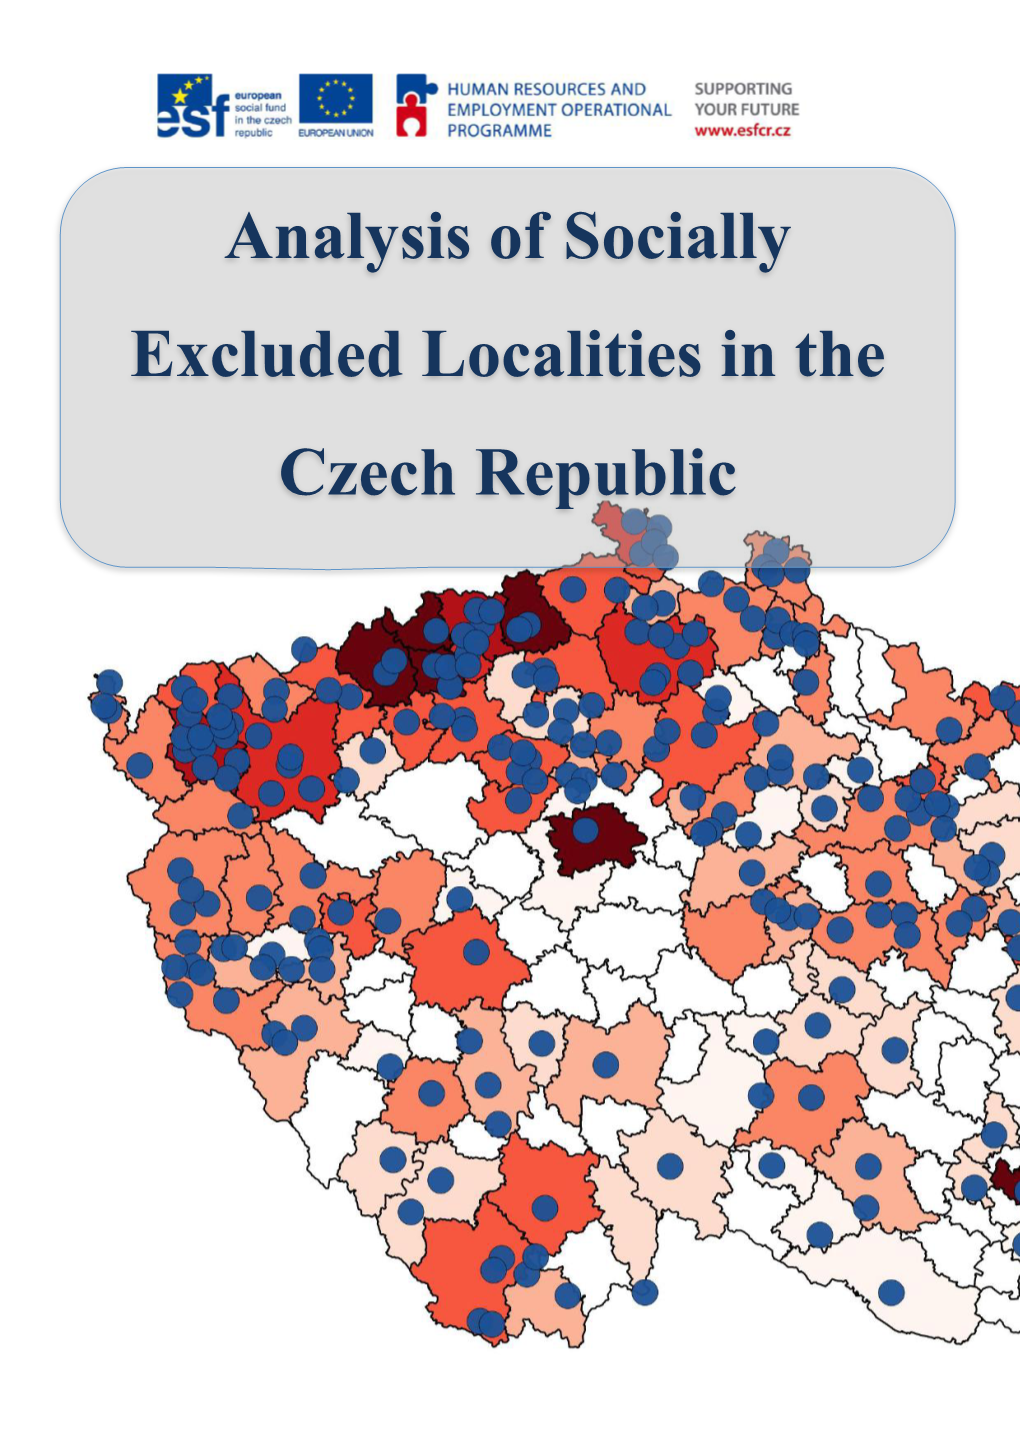 Analysis of Socially Excluded Localities in the Czech Republic